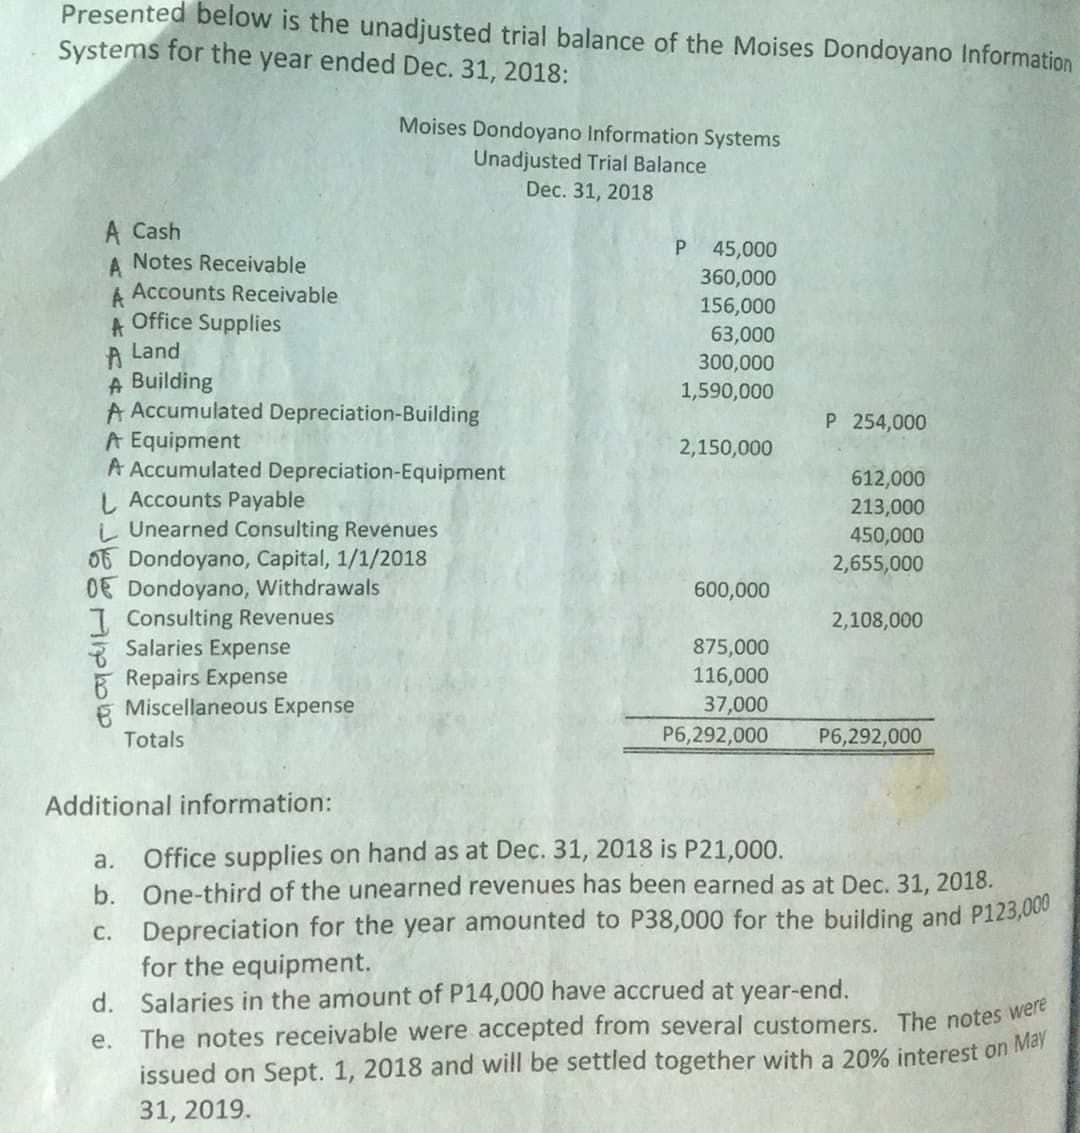 Presented below is the unadjusted trial balance of the Moises Dondoyano Information
Systems for the year ended Dec. 31, 2018:
Moises Dondoyano Information Systems
Unadjusted Trial Balance
Dec. 31, 2018
A Cash
A Notes Receivable
45,000
360,000
Accounts Receivable
156,000
Office Supplies
A
A Land
A Building
A Accumulated Depreciation-Building
A Equipment
A Accumulated Depreciation-Equipment
L Accounts Payable
i Unearned Consulting Revenues
06 Dondoyano, Capital, 1/1/2018
OE Dondoyano, Withdrawals
7. Consulting Revenues
* Salaries Expense
R Repairs Expense
Miscellaneous Expense
63,000
300,000
1,590,000
P 254,000
2,150,000
612,000
213,000
450,000
2,655,000
600,000
2,108,000
875,000
116,000
37,000
Totals
P6,292,000
P6,292,000
Additional information:
Office supplies on hand as at Dec. 31, 2018 is P21,000.
b. One-third of the unearned revenues has been earned as at Dec. 31, 2018.
а.
C. Depreciation for the year amounted to P38,000 for the building and P123,000
for the equipment.
Salaries in the amount of P14,000 have accrued at year-end.
The notes receivable were accepted from several customers. The notes were
issued on Sept. 1, 2018 and will be settled together with a 20% interest on Mar
d.
е.
31, 2019.
